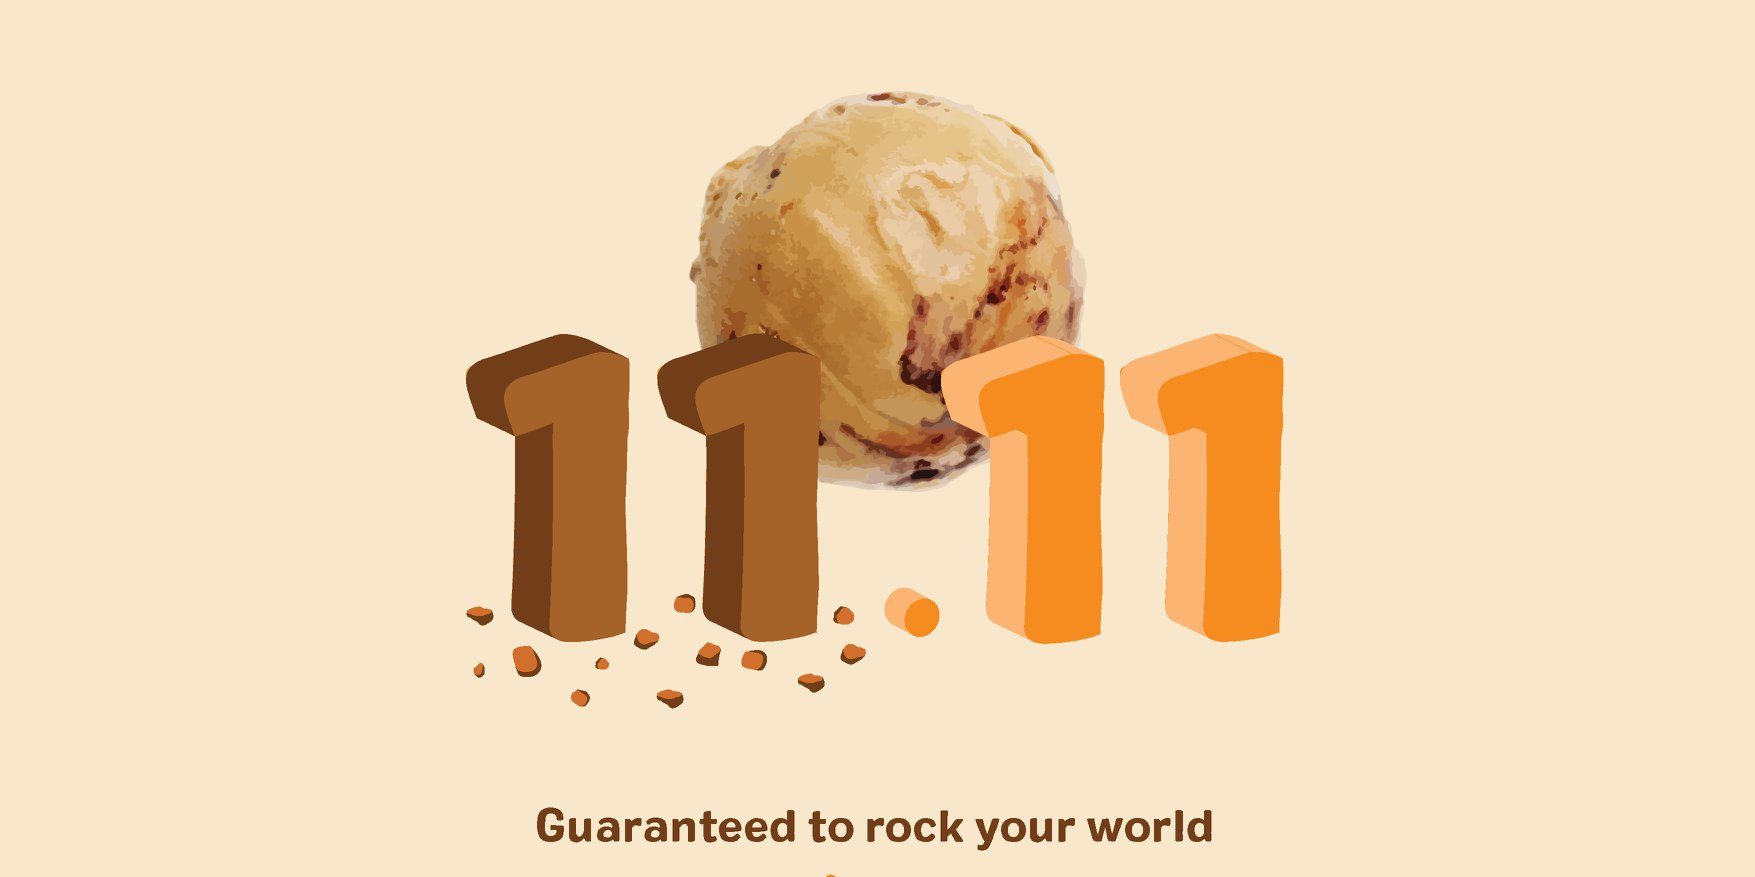 Udders Singapore Mocha Rocks Flavour Now Available This 11.11 Promotion While Stocks Last